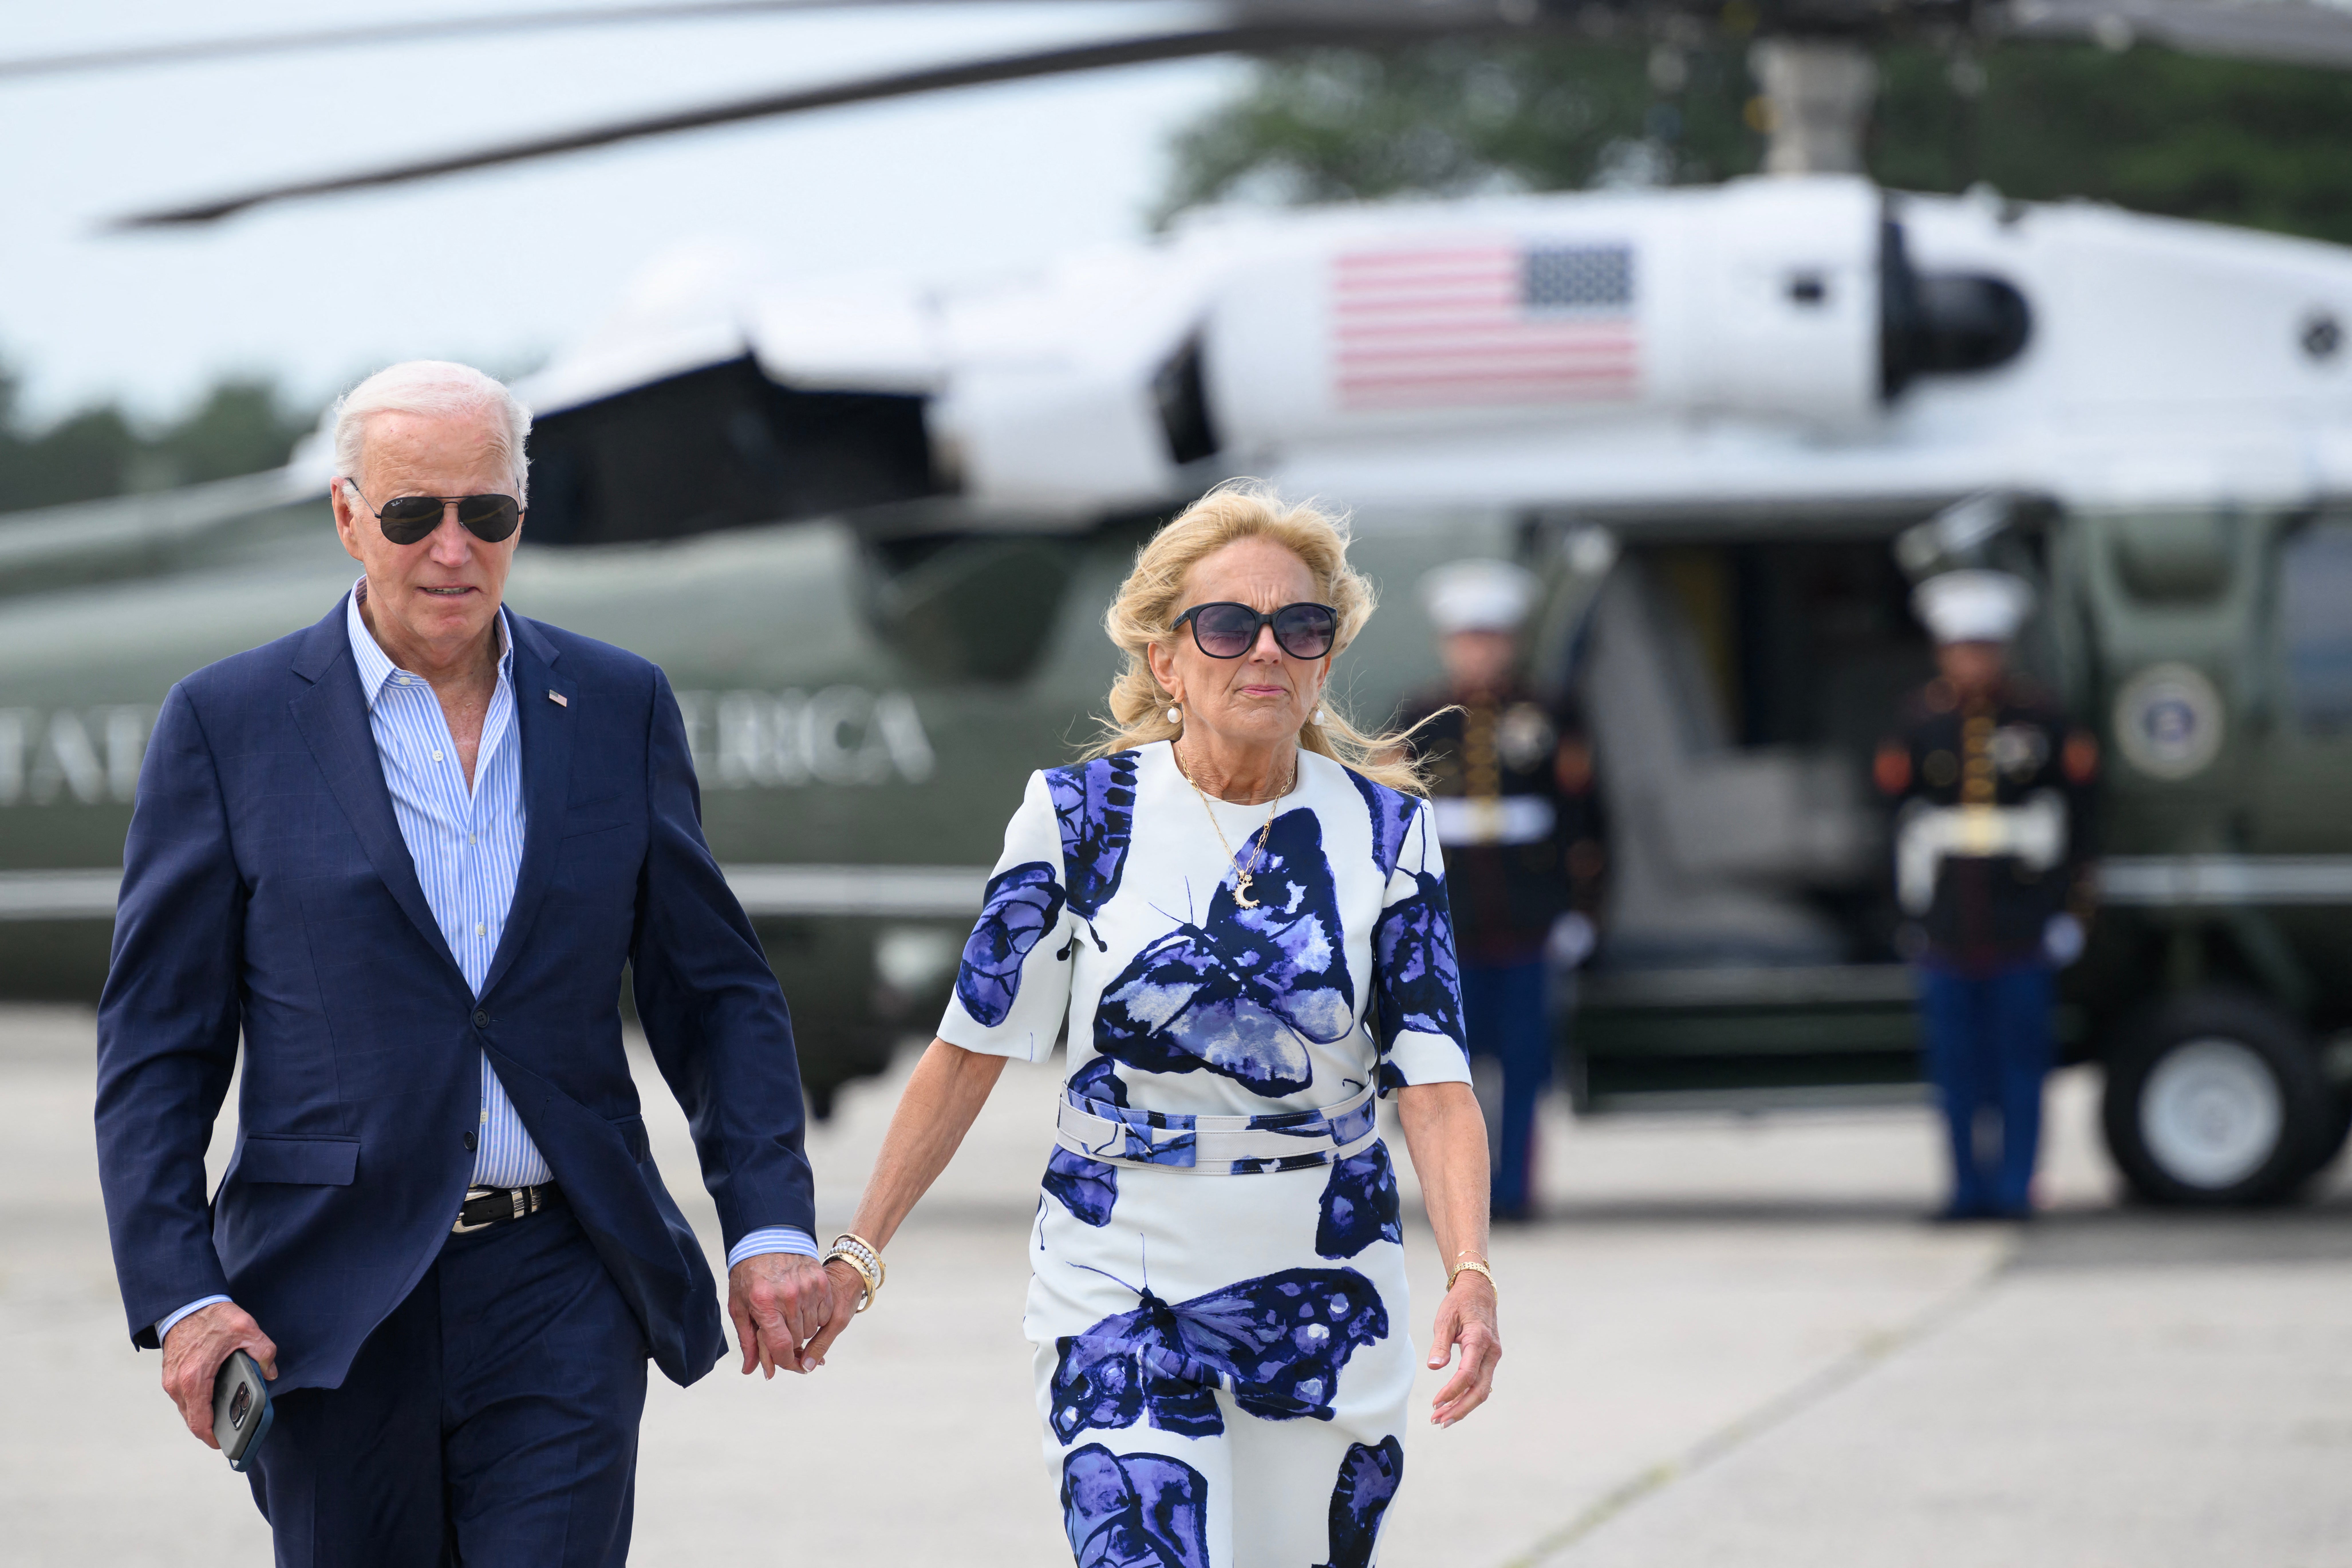 US President Joe Biden and First Lady Jill Biden walk from Marine One to board Air Force One at Francis S. Gabreski Airport in Westhampton Beach, New York